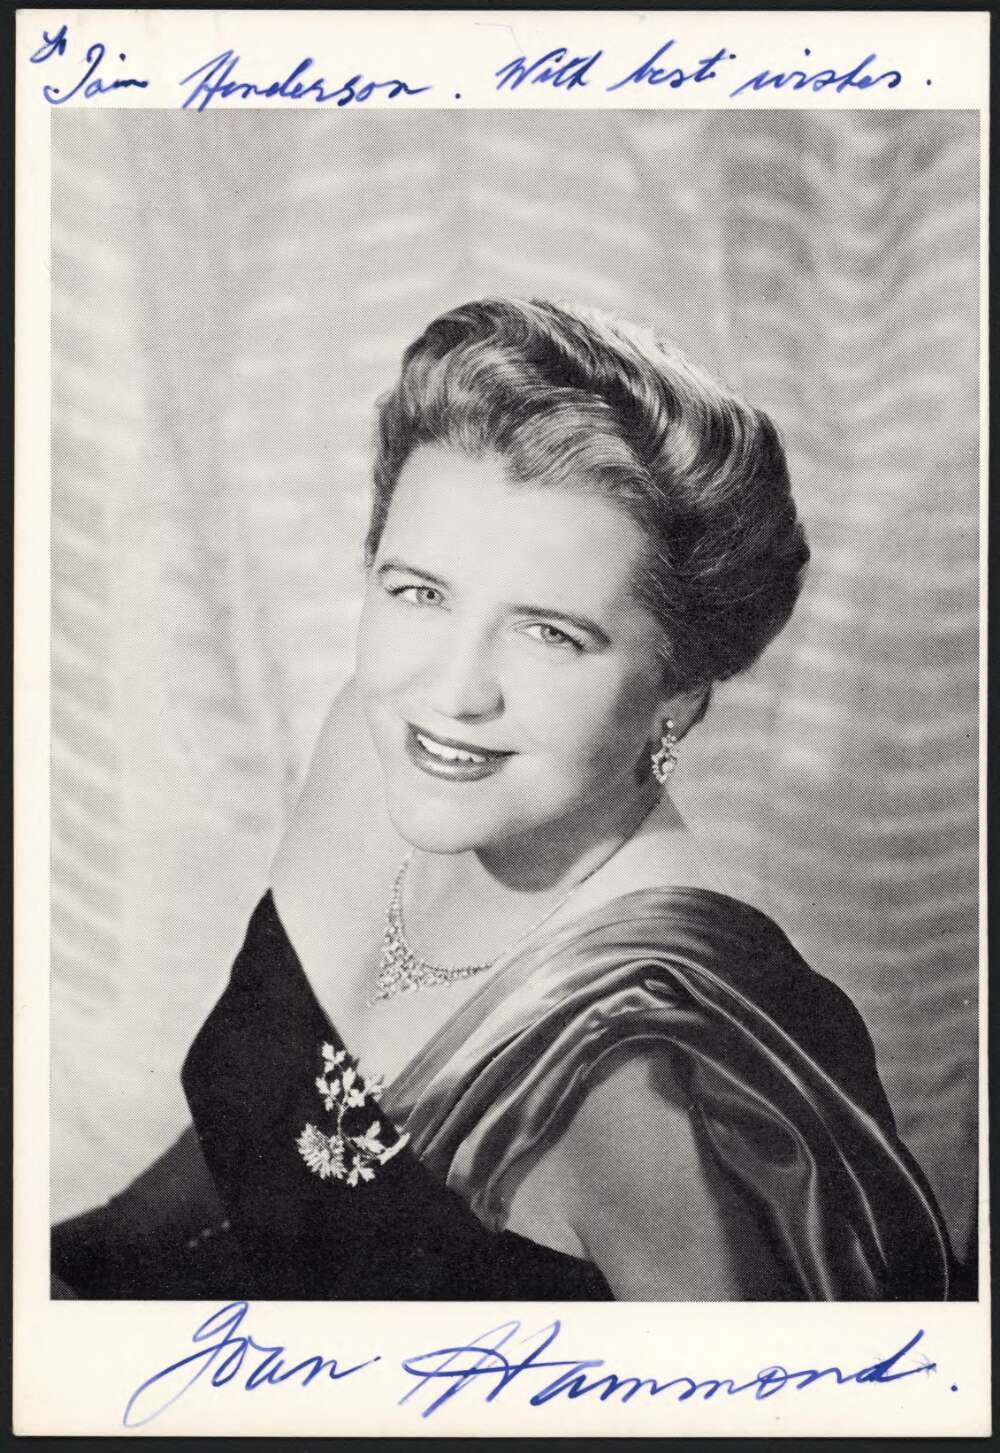 Photo of Dame Jean Hammond in evening gown